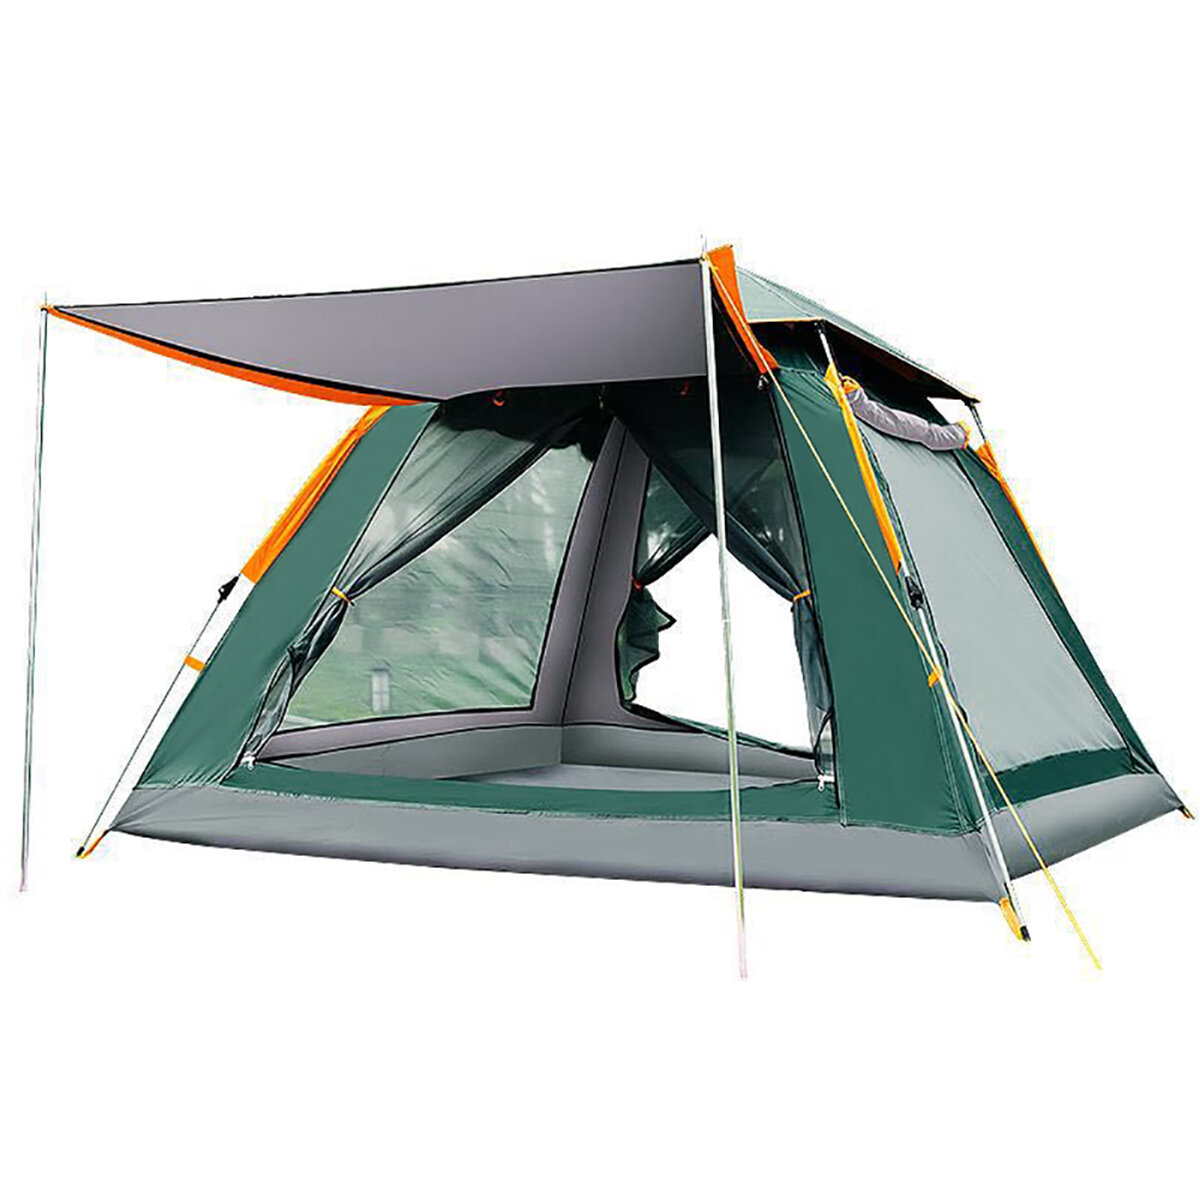 3-4Person/5-8 Person Automatic Speed-open Camping Tent 210T Oxford Cloth Double Deck Sun Protection Waterproof Tent Sun Shelter Open Up Tent For Hiking Climbing